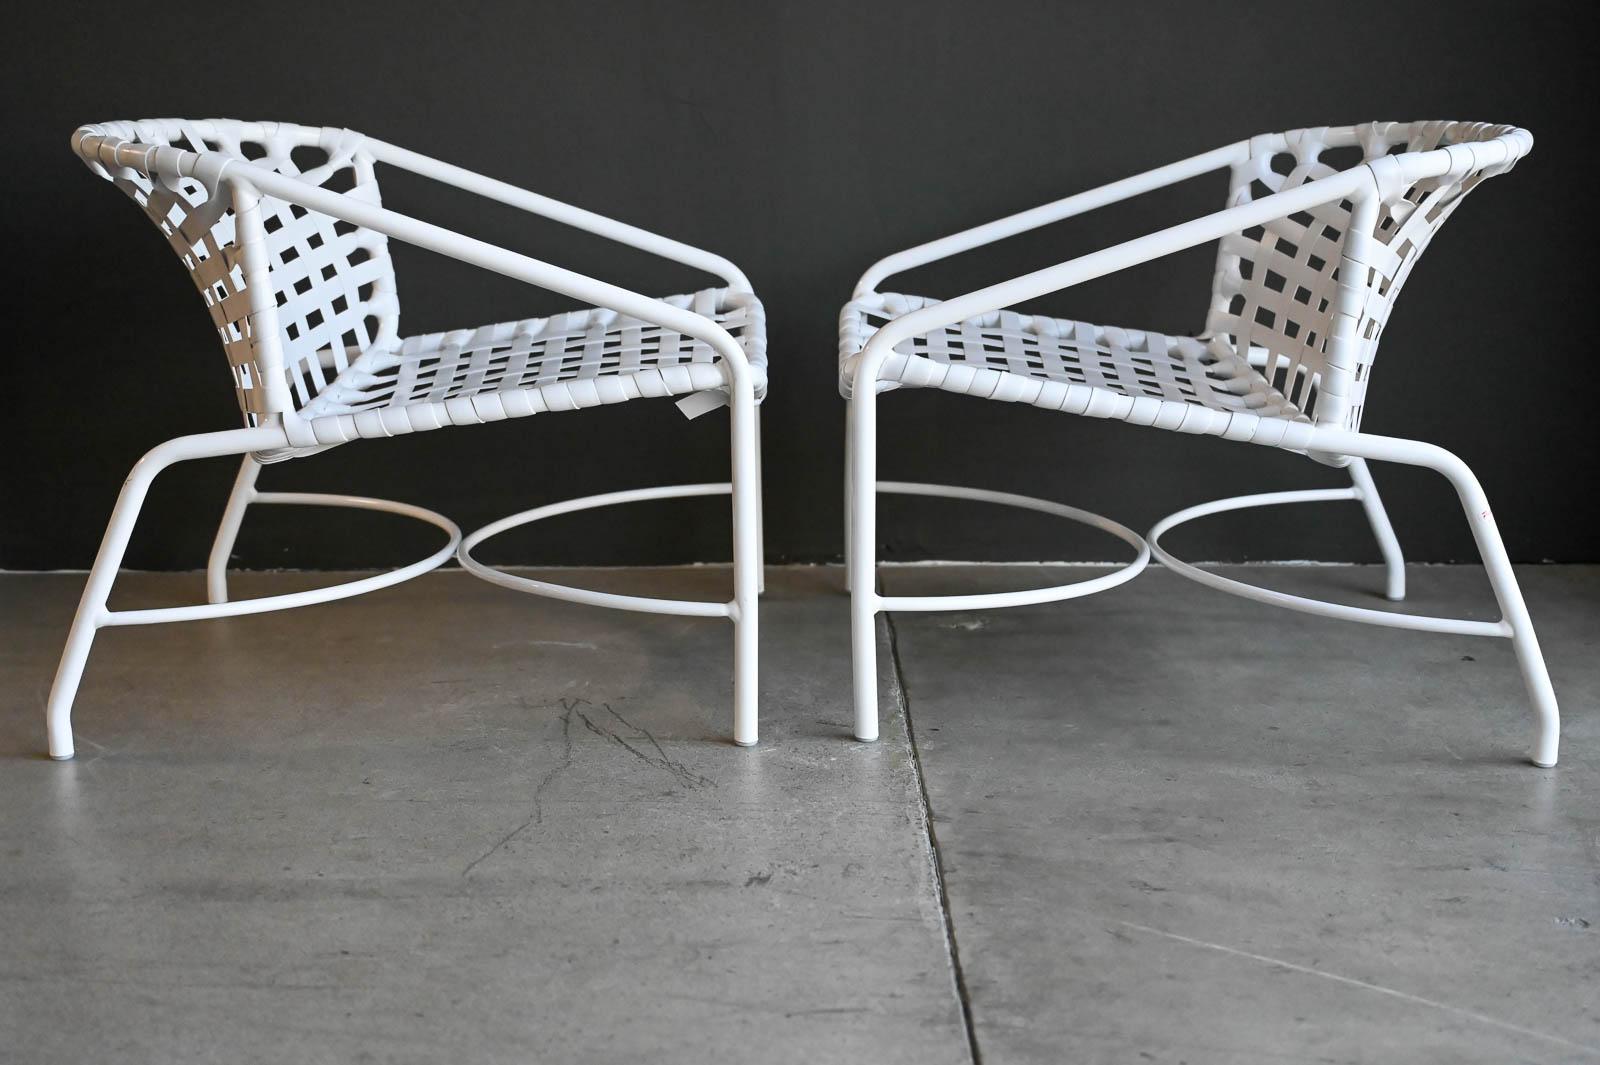 Pair of Tadao Inouye for Brown Jordan Kantan Lounge Chairs, ca. 1960.  Beautiful pair of low lounge chairs by Tadao Inouye for Brown Jordan.  Professionally restored newly powder coated frames and new strapping make these beautiful chairs better